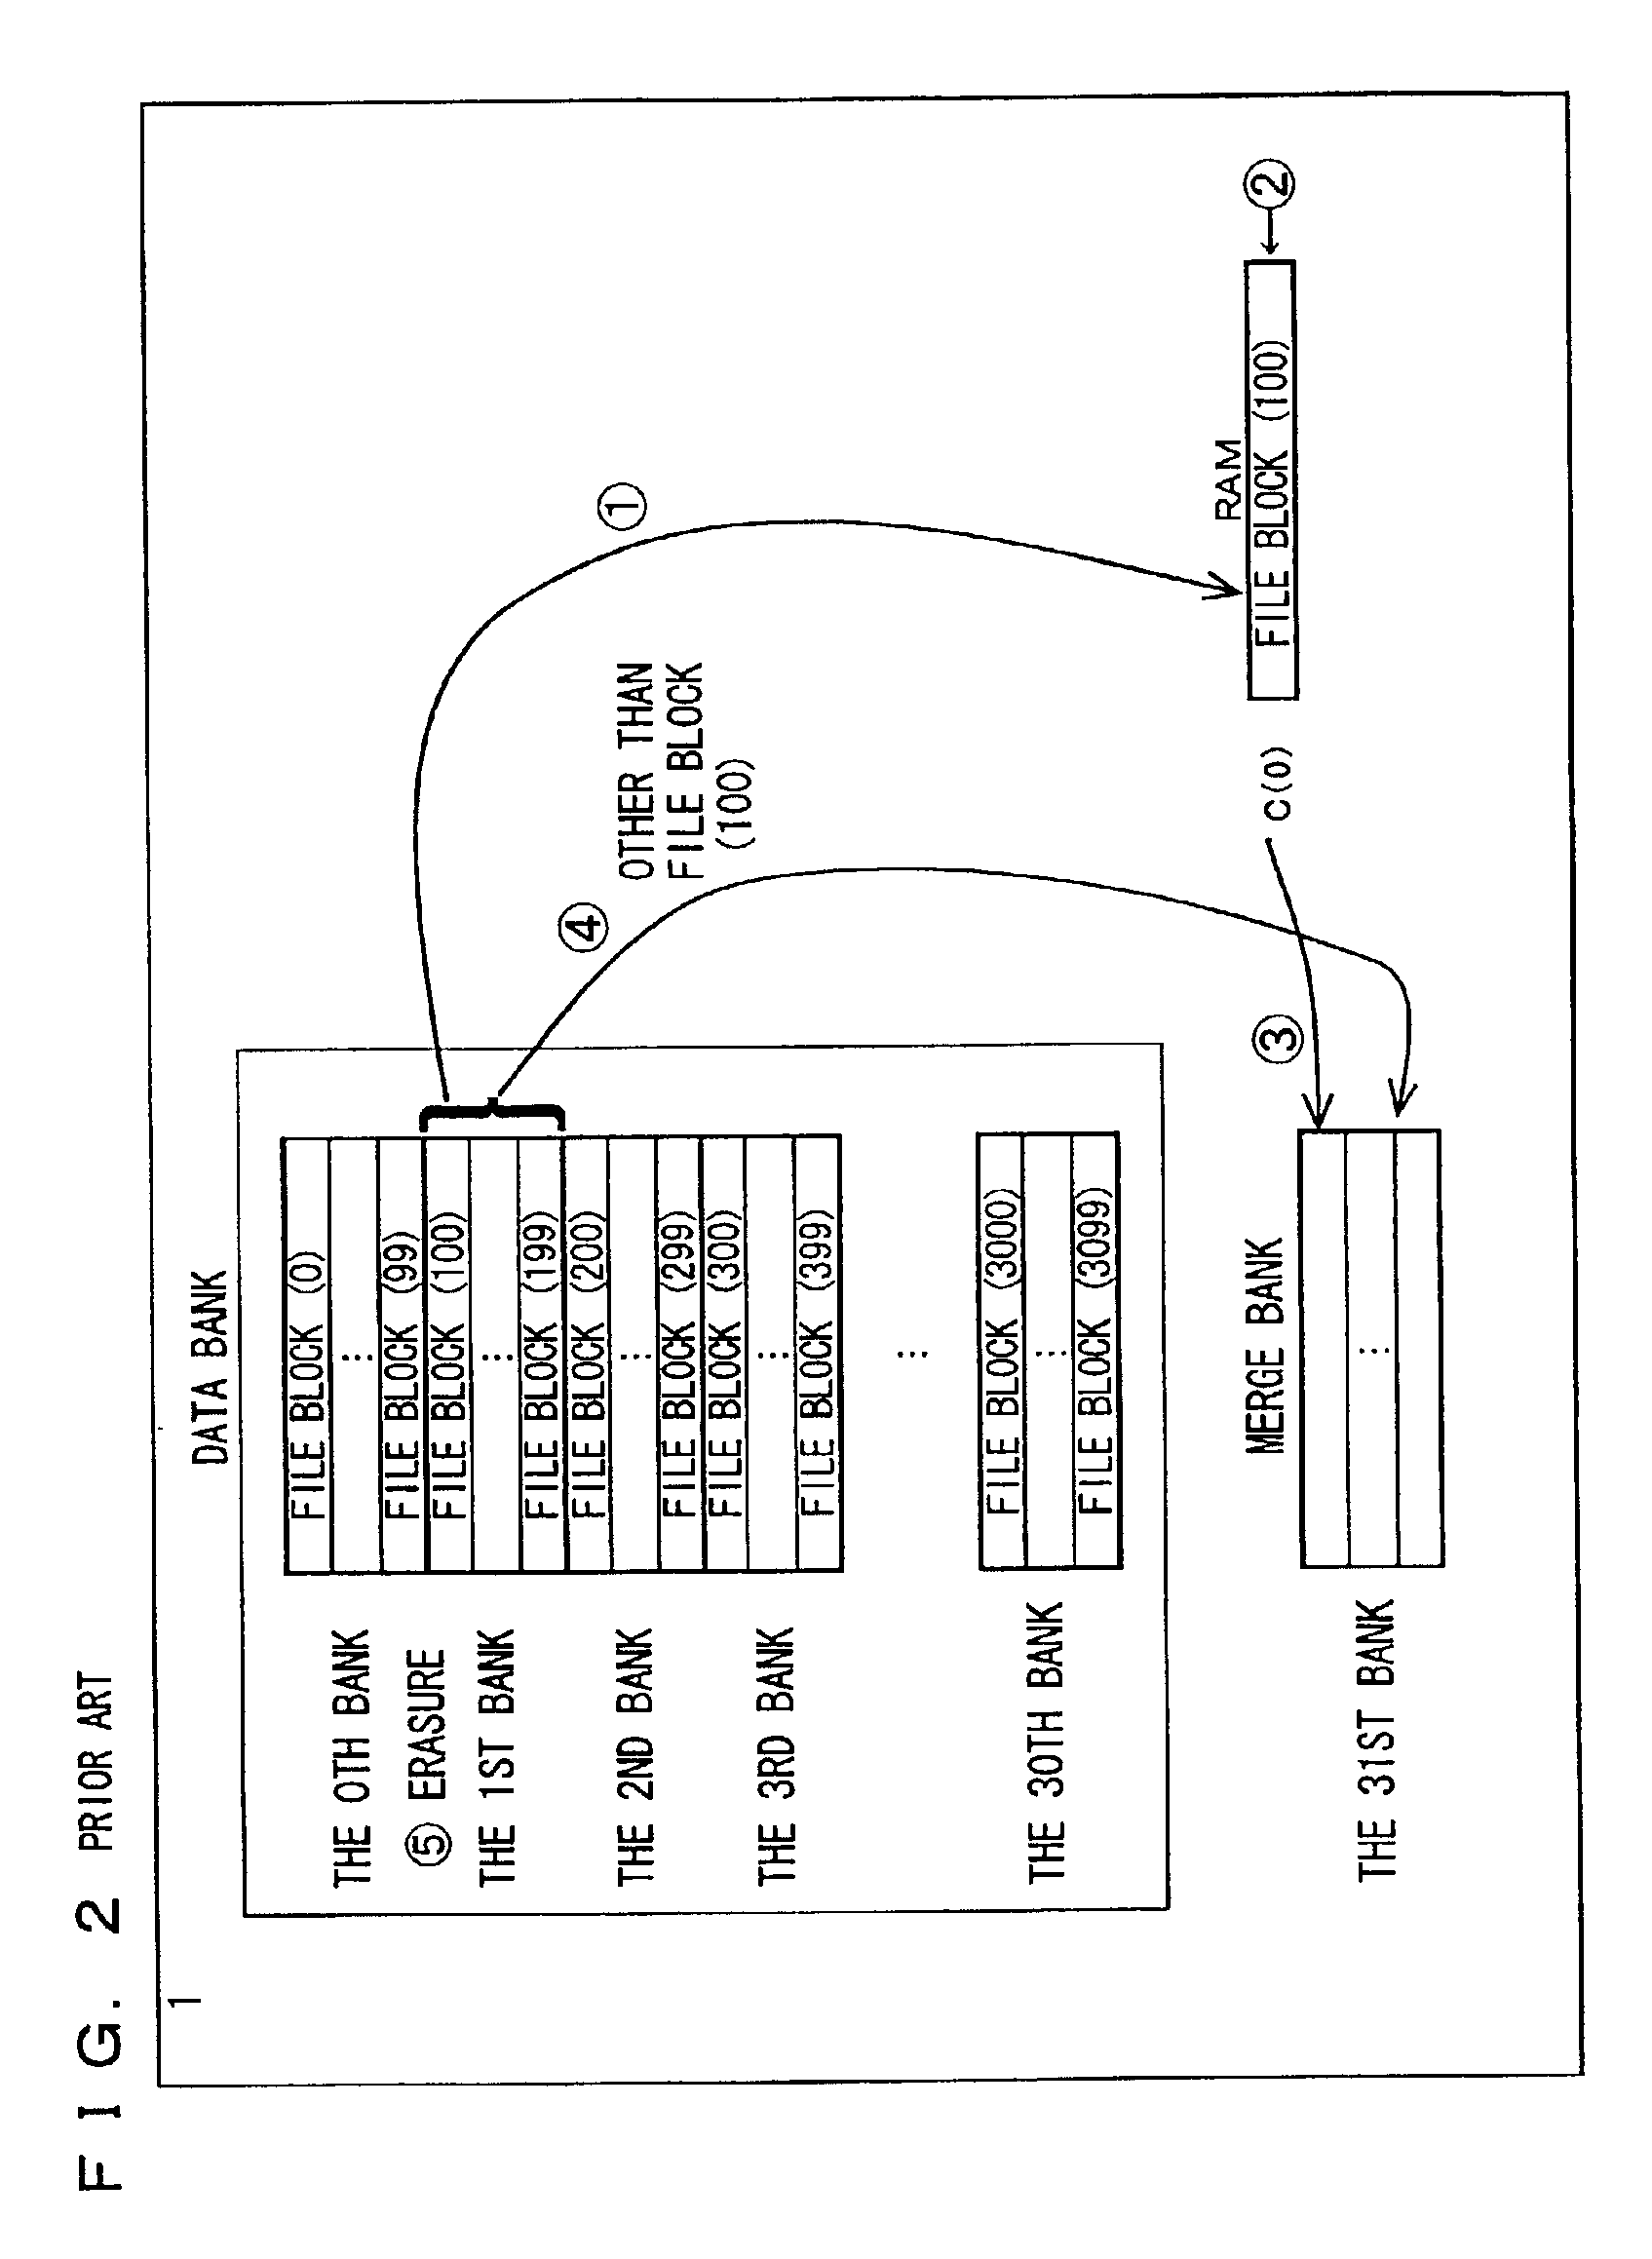 File system including non-volatile semiconductor memory device having a plurality of banks